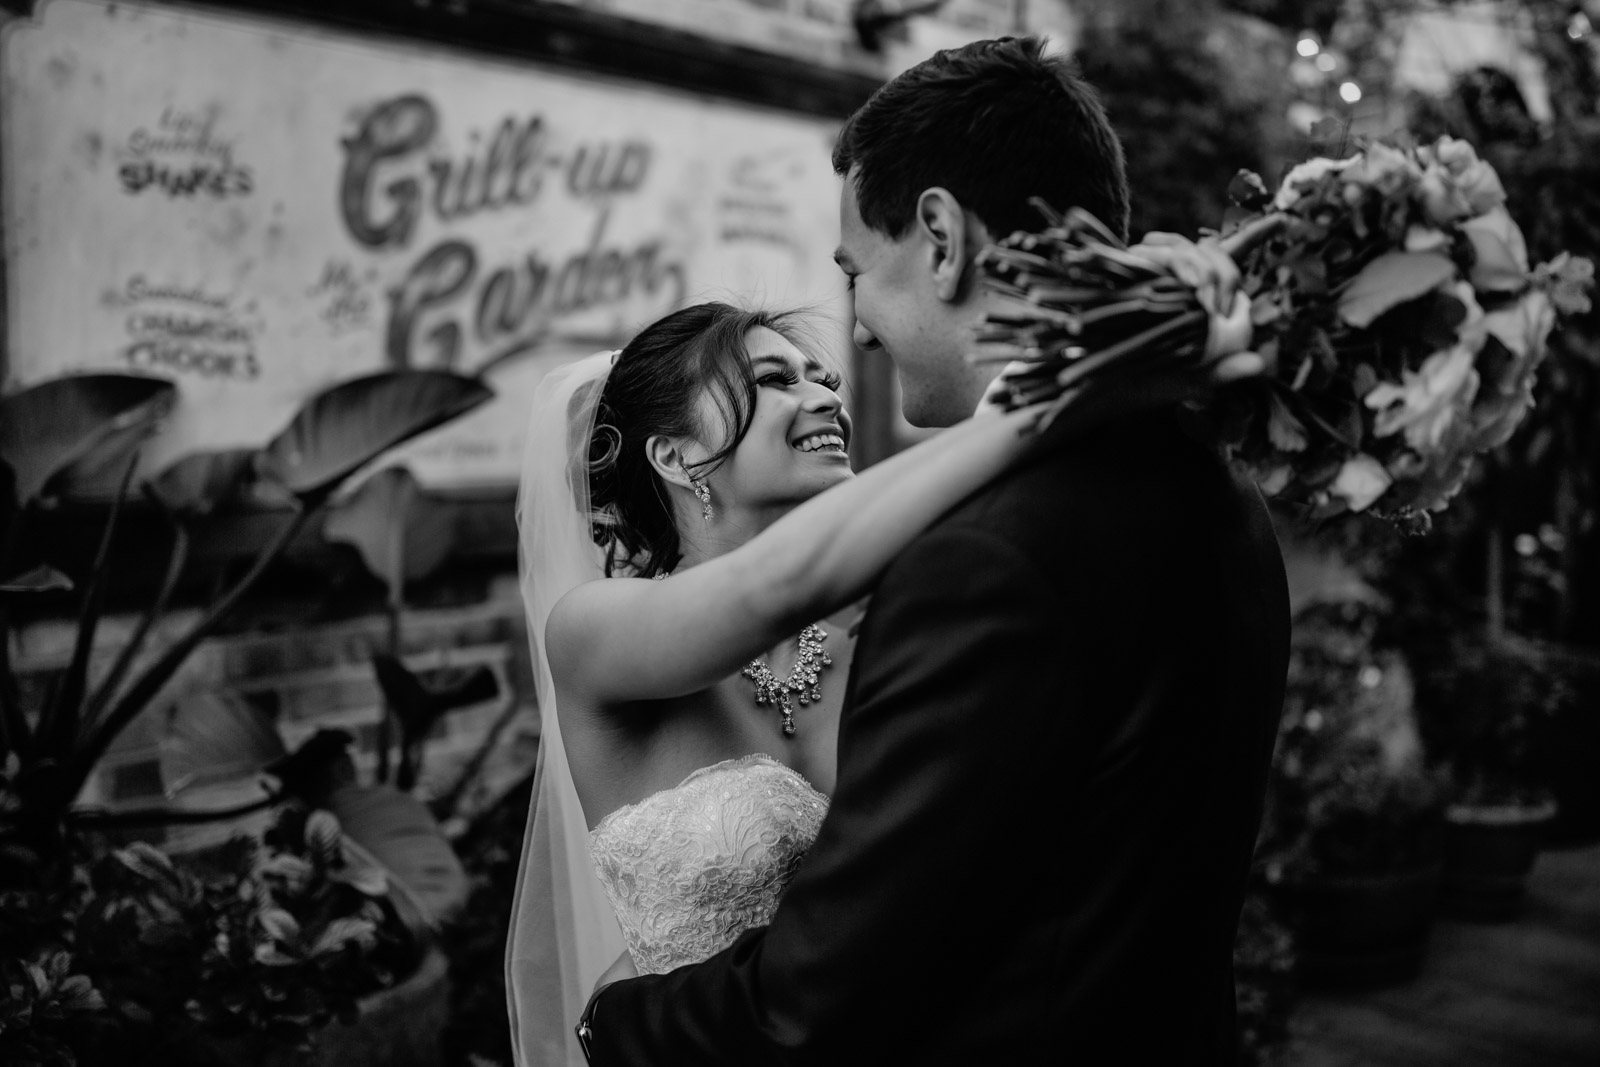 A black and white image of a man and woman embracing on their wedding day. The woman has dark hair in an up-do and a veil hanging from her bun, she has her arms around the man’s neck as she holds a bouquet of flowers, both the man and woman are smiling. In the background is an old-style billboard with cursive text on it, and some plants.